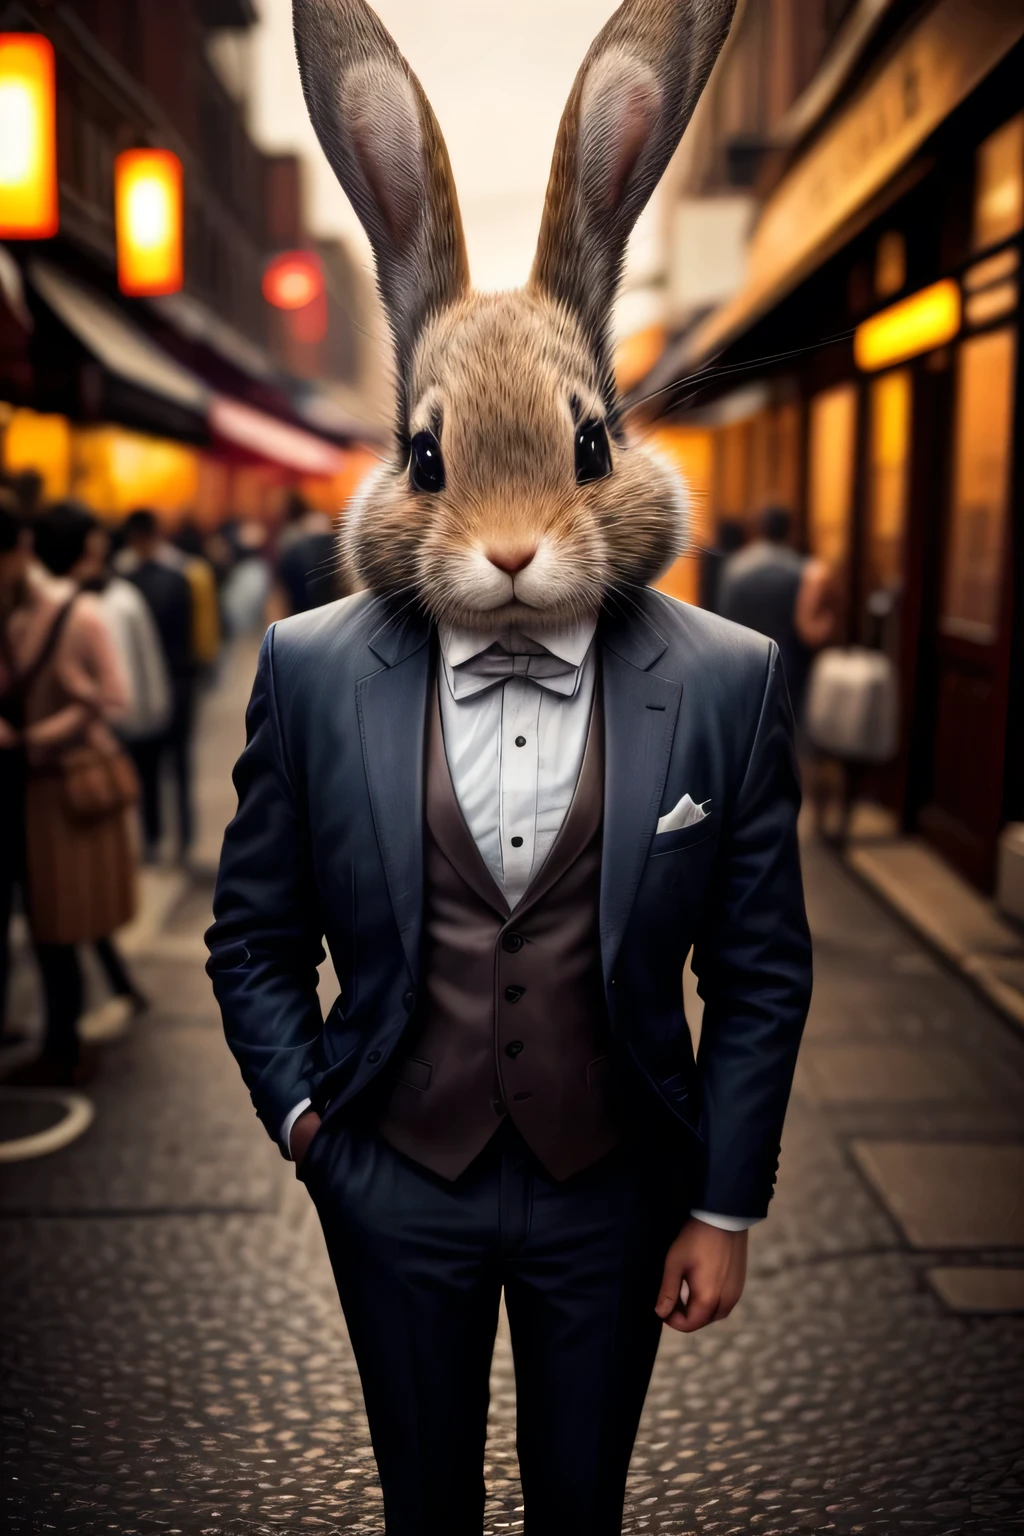 A photo of a rabbit in a neat suit, adorable face, cute expression, Perfect Anatomy, detailed rabbit's ears, focus on the peak of rabbit's ears, beautiful views, Detailed face. full body shot, night street